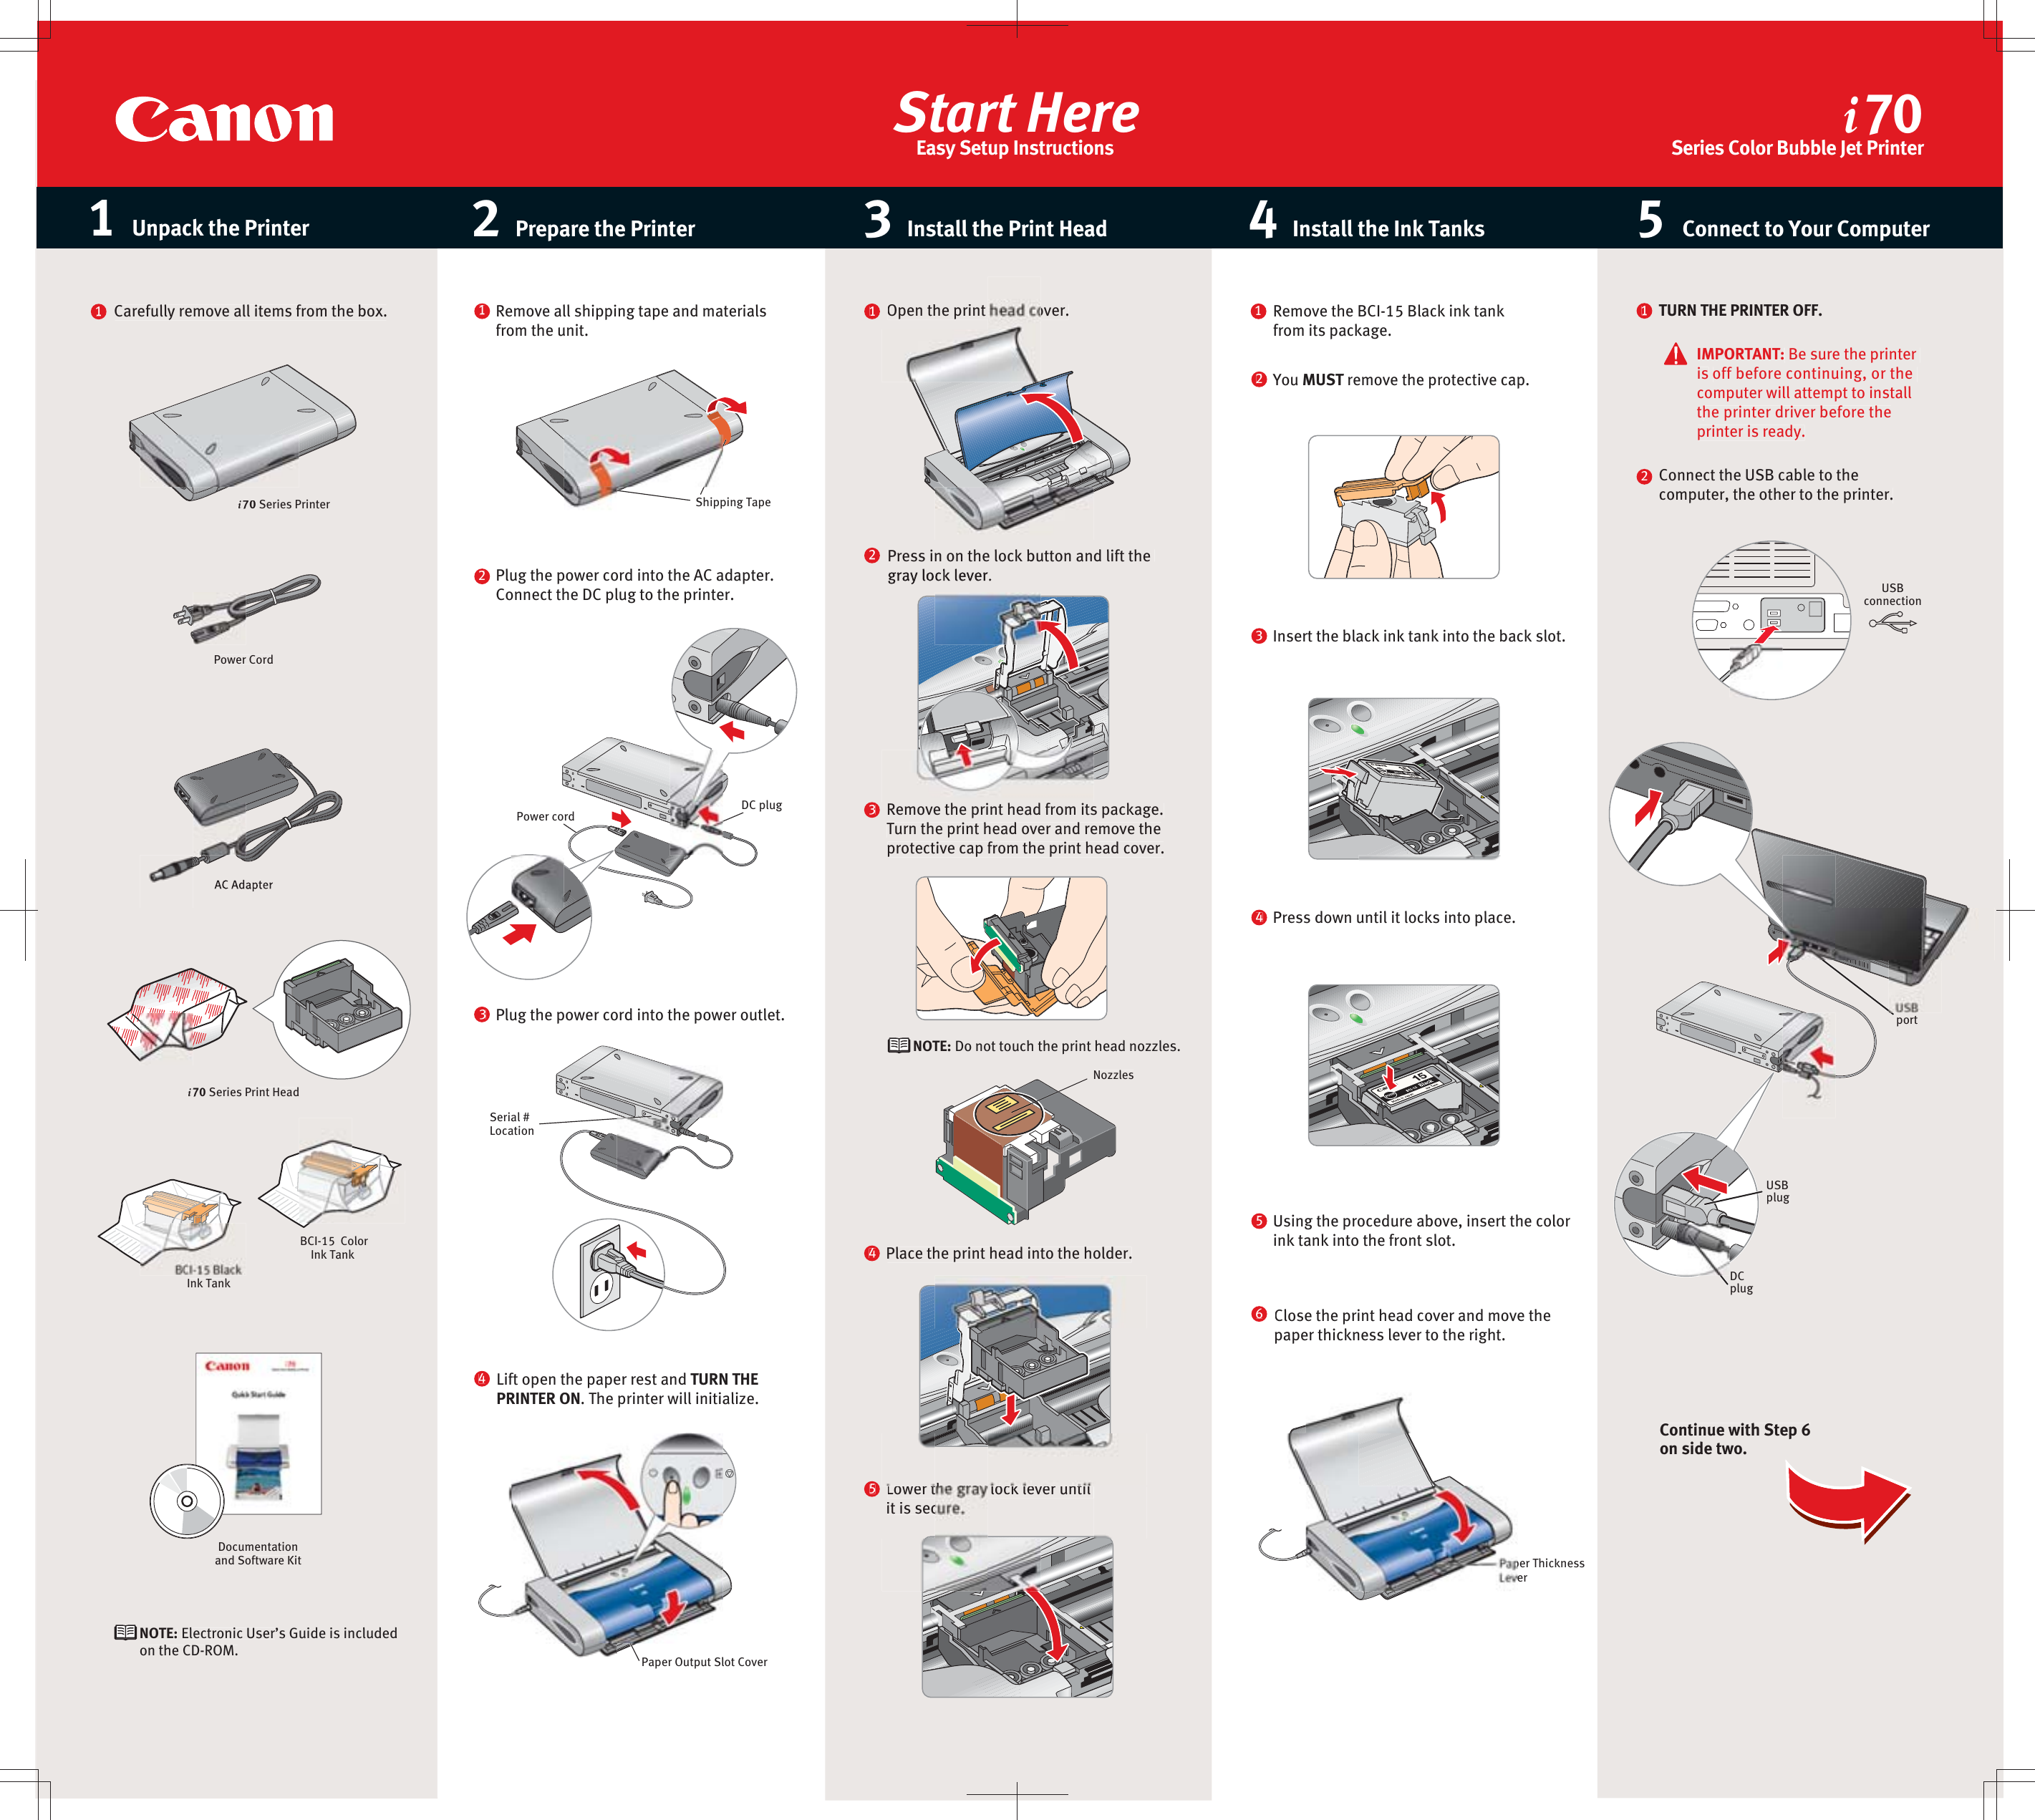 Page 1 of 2 - Canon Canon-I70-Instruction-Guide-  Canon-i70-instruction-guide